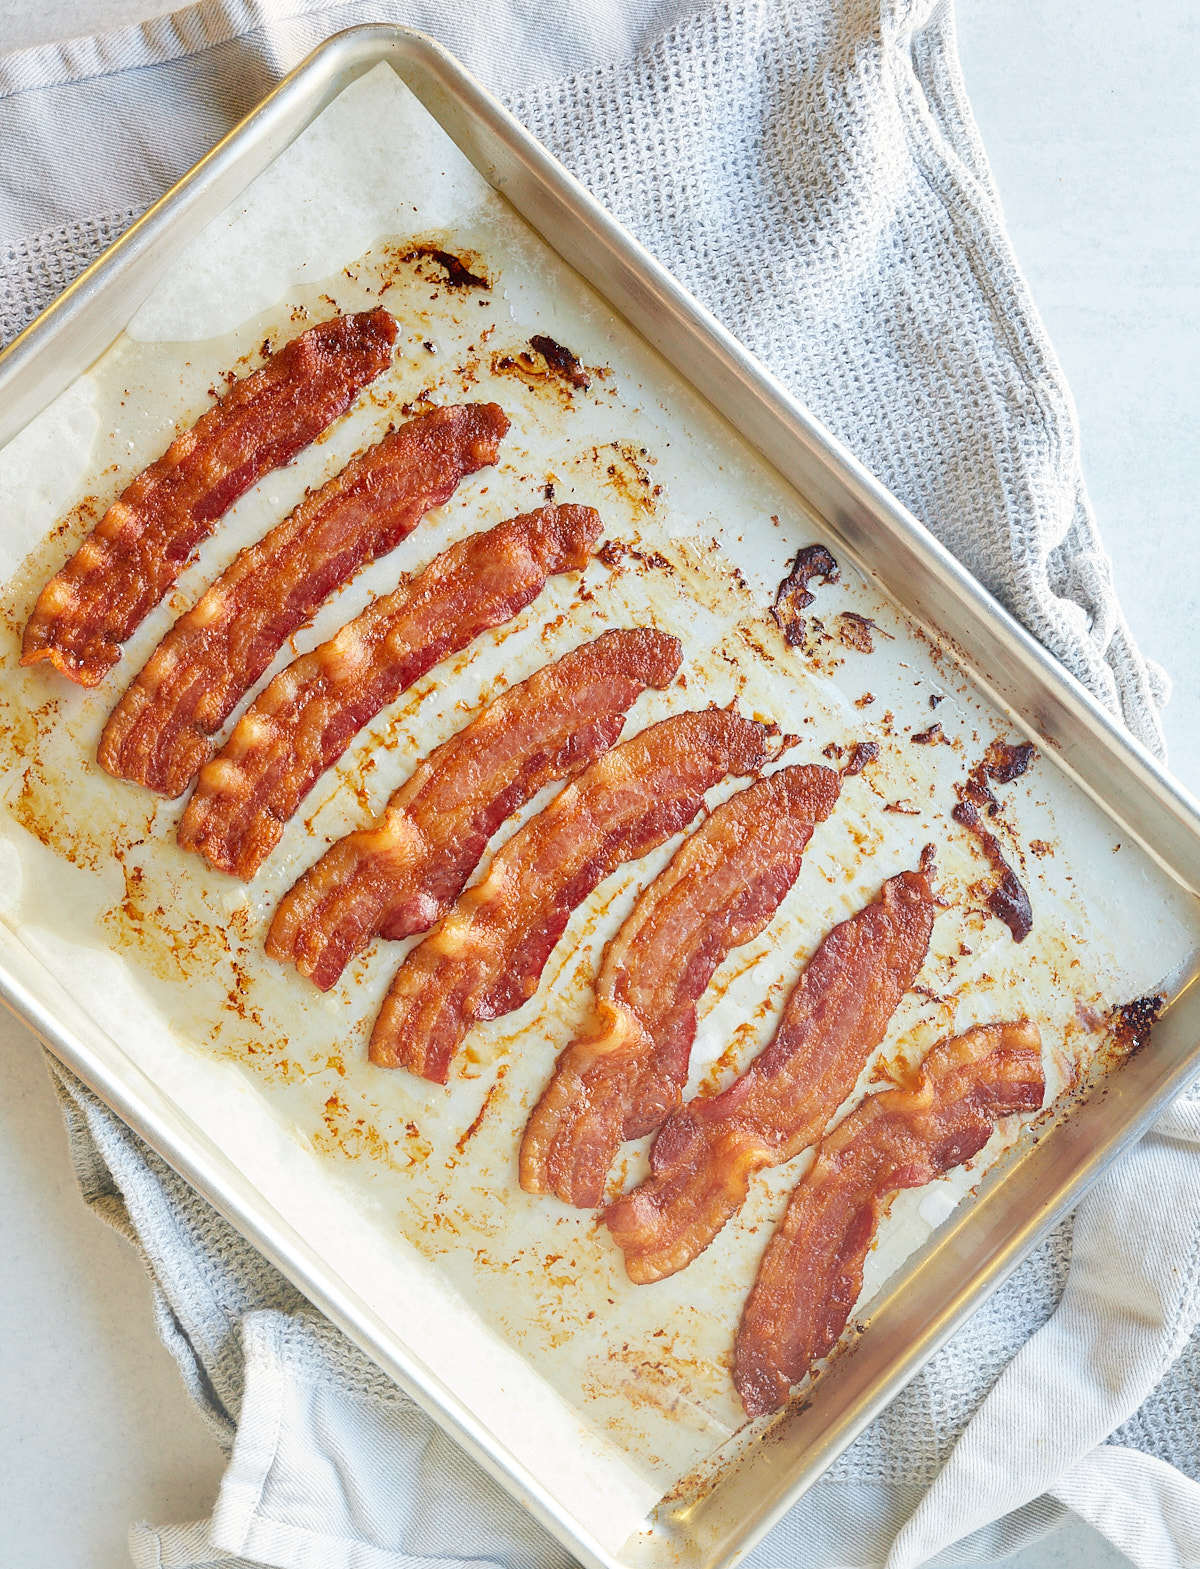 https://www.myforkinglife.com/wp-content/uploads/2022/01/how-to-bake-bacon-in-the-oven-0018.jpg